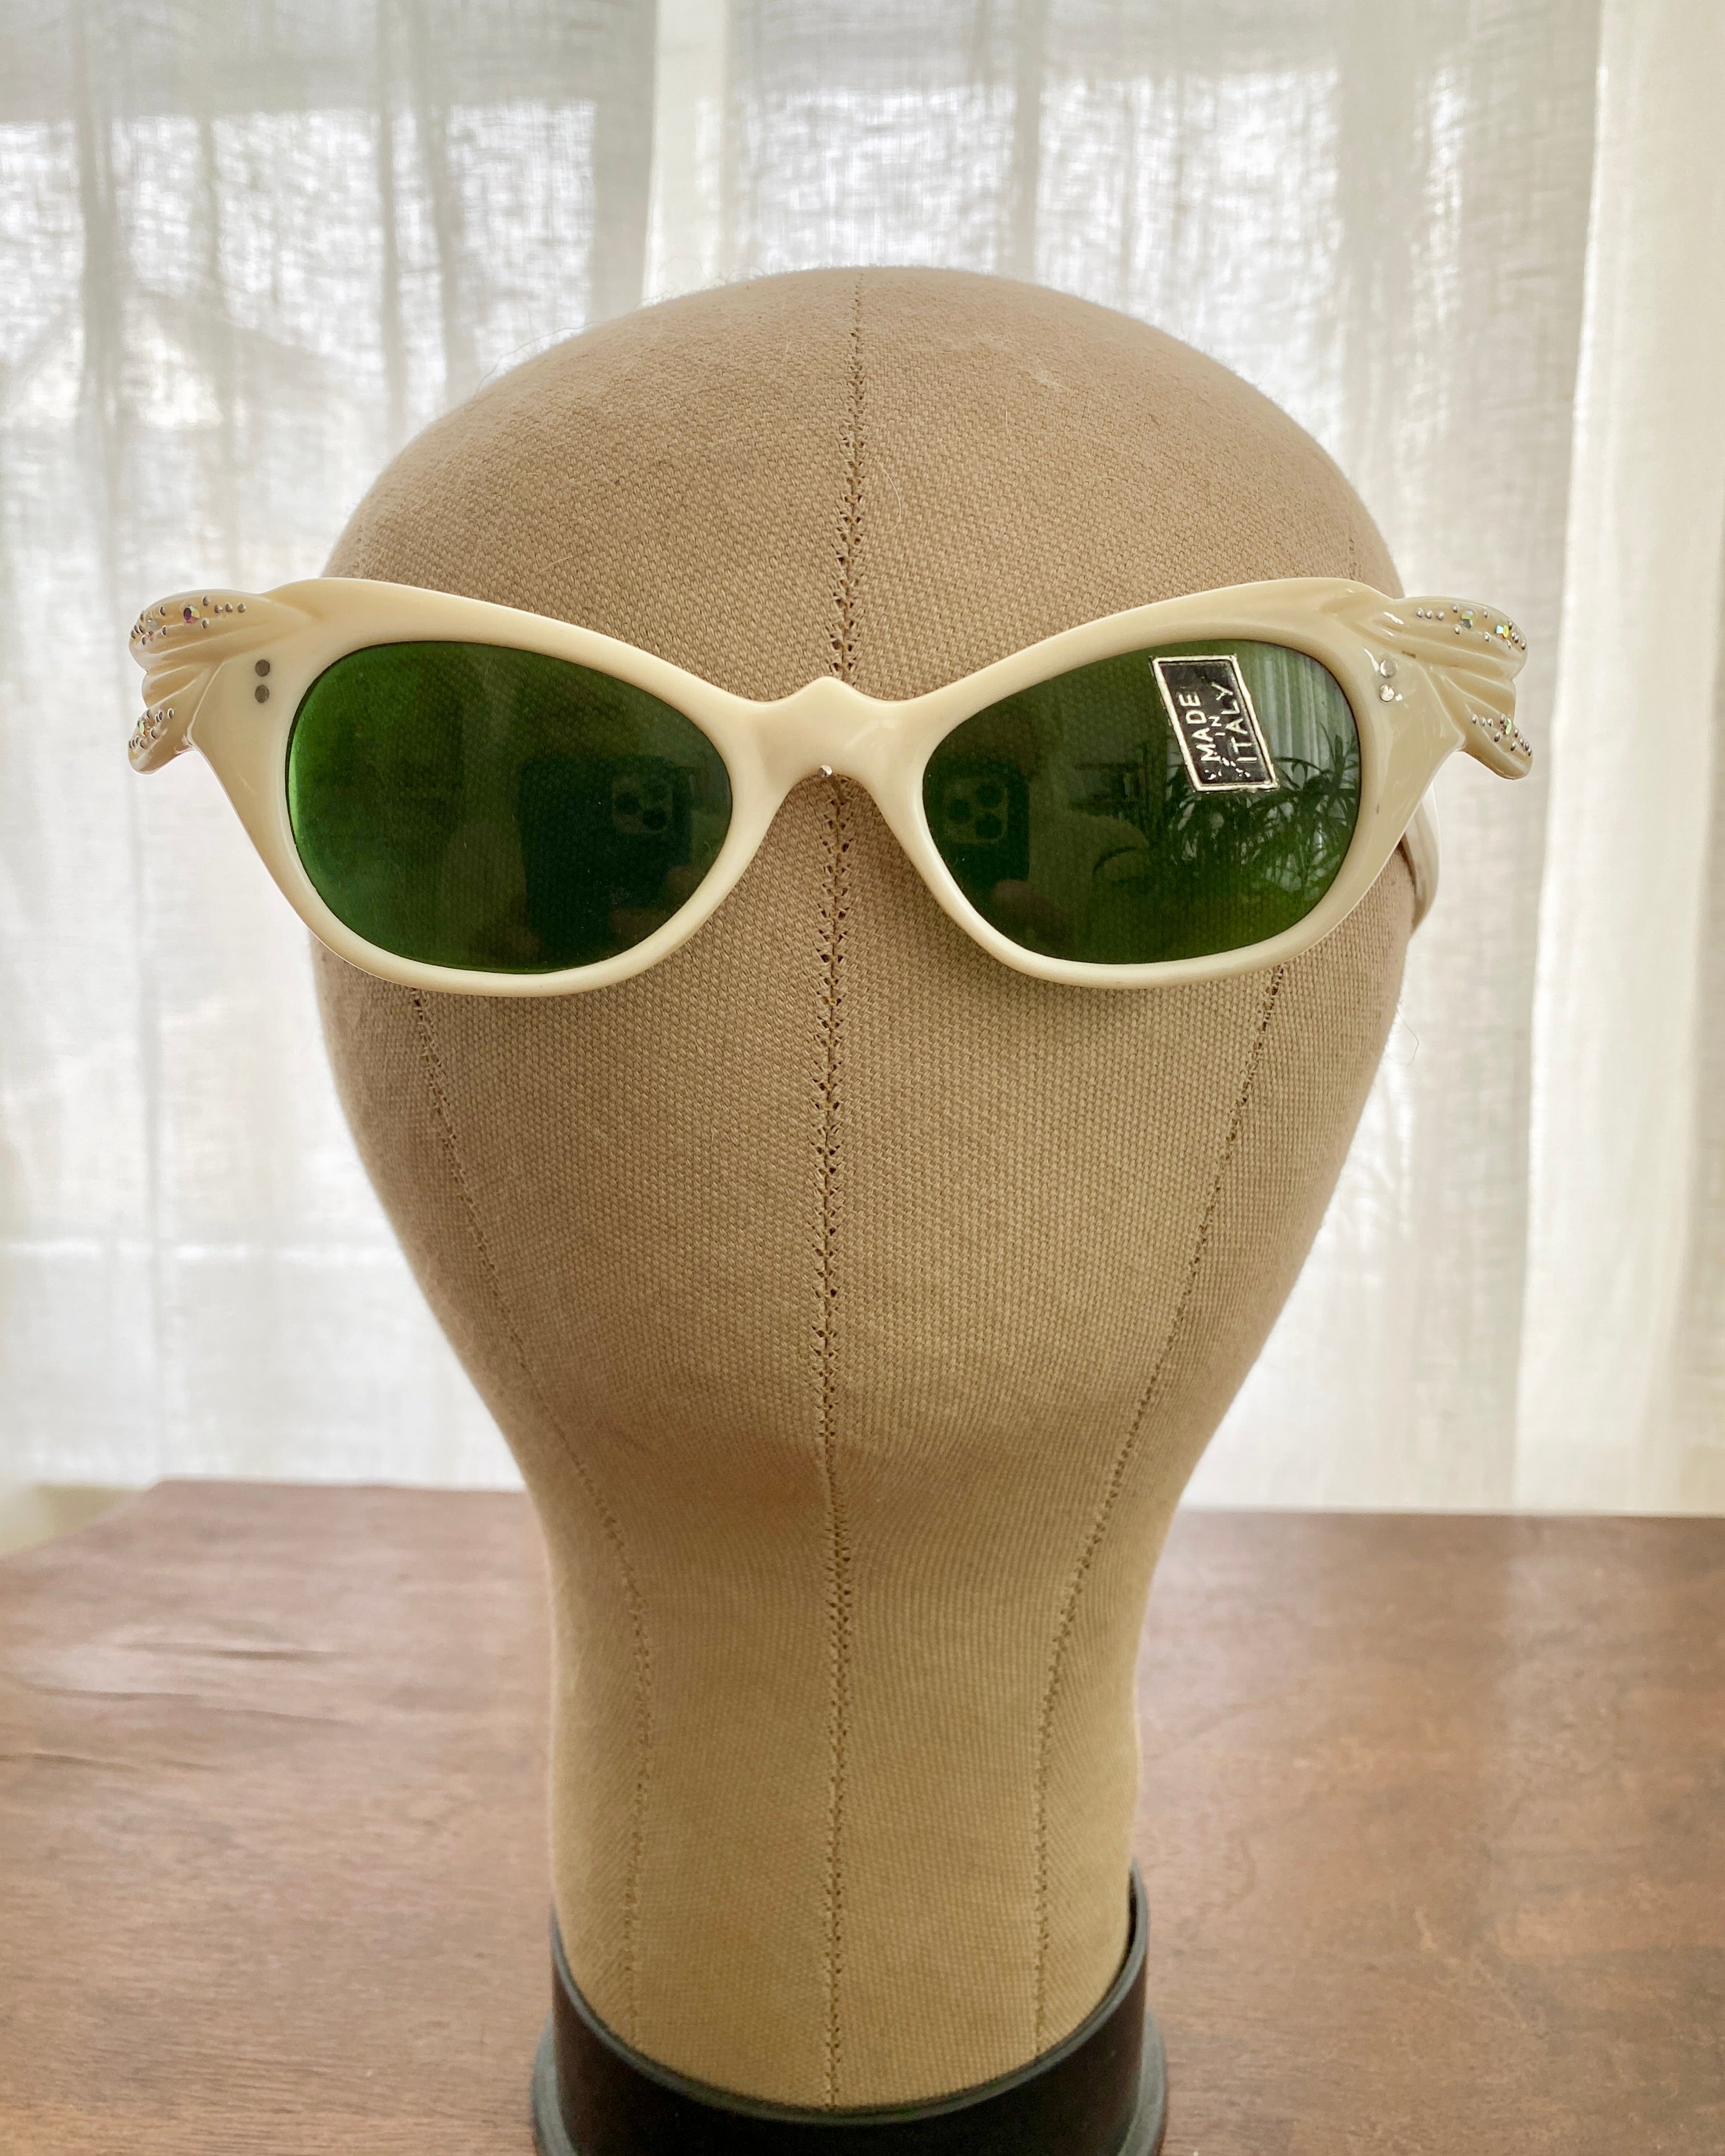 Vintage 1950s Italian Bone Color Lucite with Rhinestones Cat Eye Sunglasses Deadstock with Tags